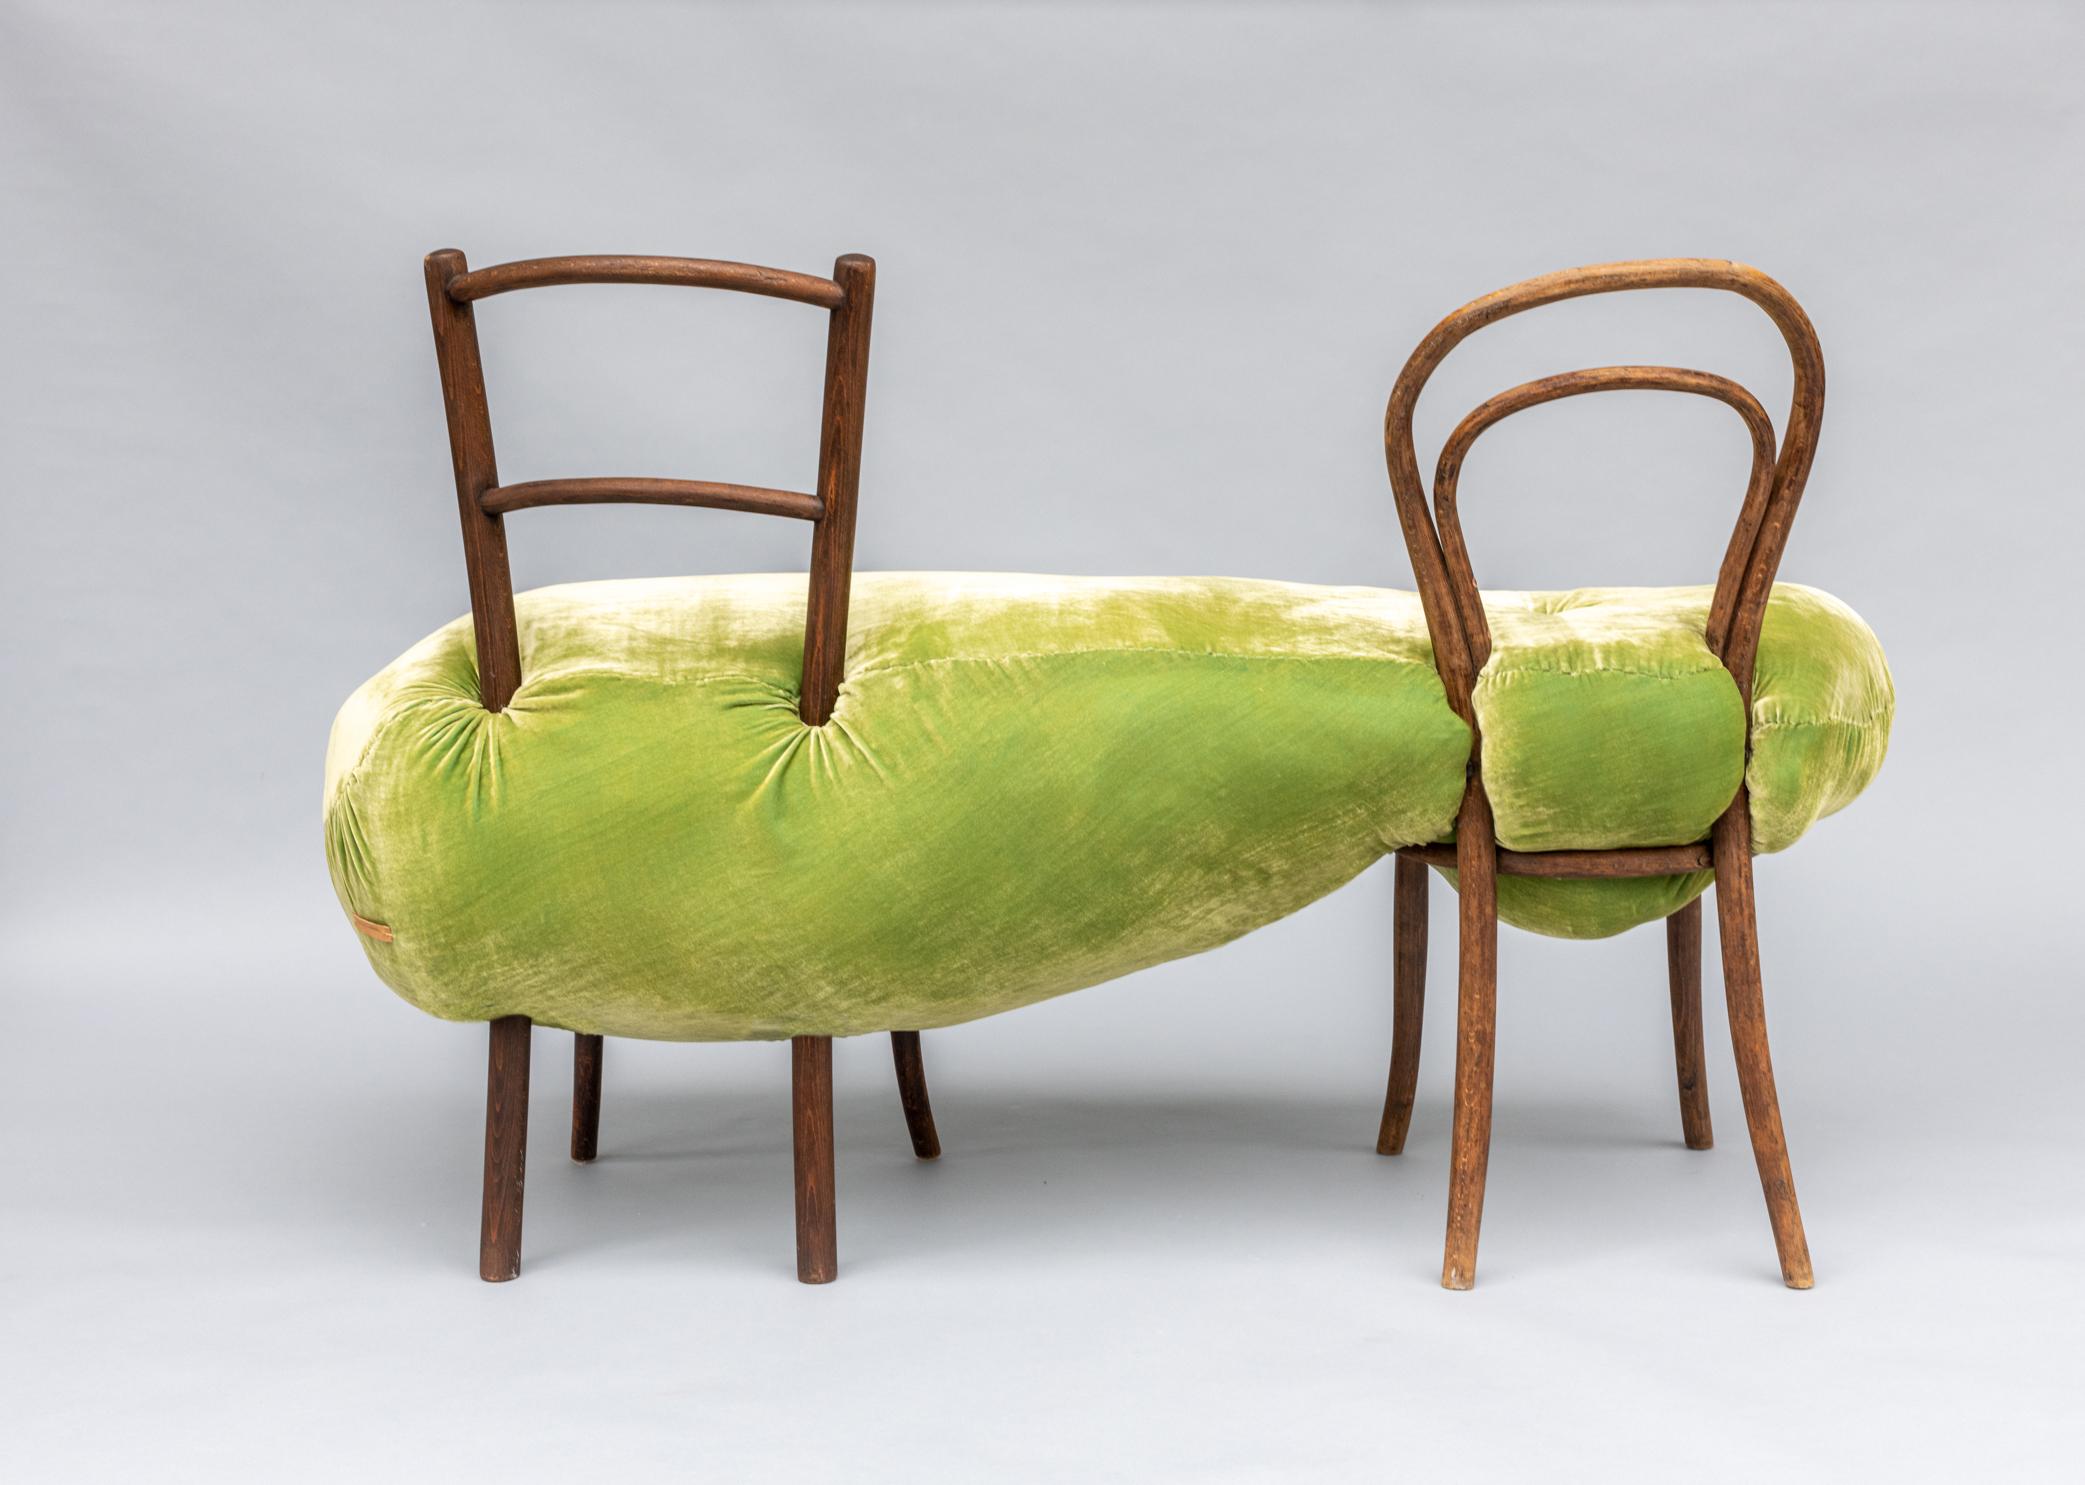 Squishy Thonet II is a continuation of the Hi!breed family. This series explores the personification of old beaten up chair frames with a sense of a life before. 
This is a bench sculpted from two old Thonet bentwood chairs engulfed in biomorphic